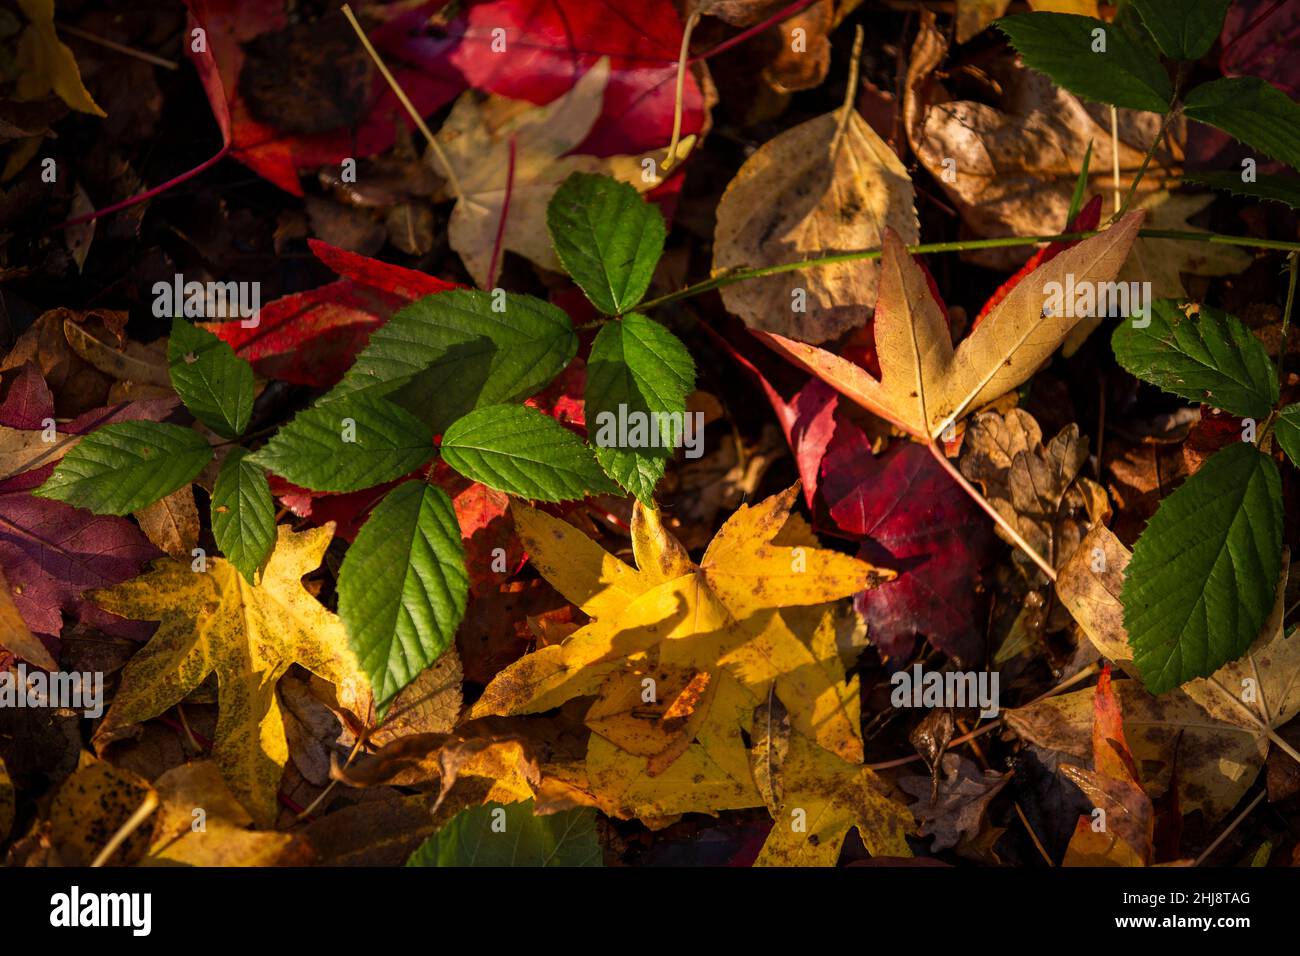 UK, England, Cheshire, Goostrey, University of Manchester, Jodrell Bank Arboretum in autumn, colourful leaves on ground Stock Photo